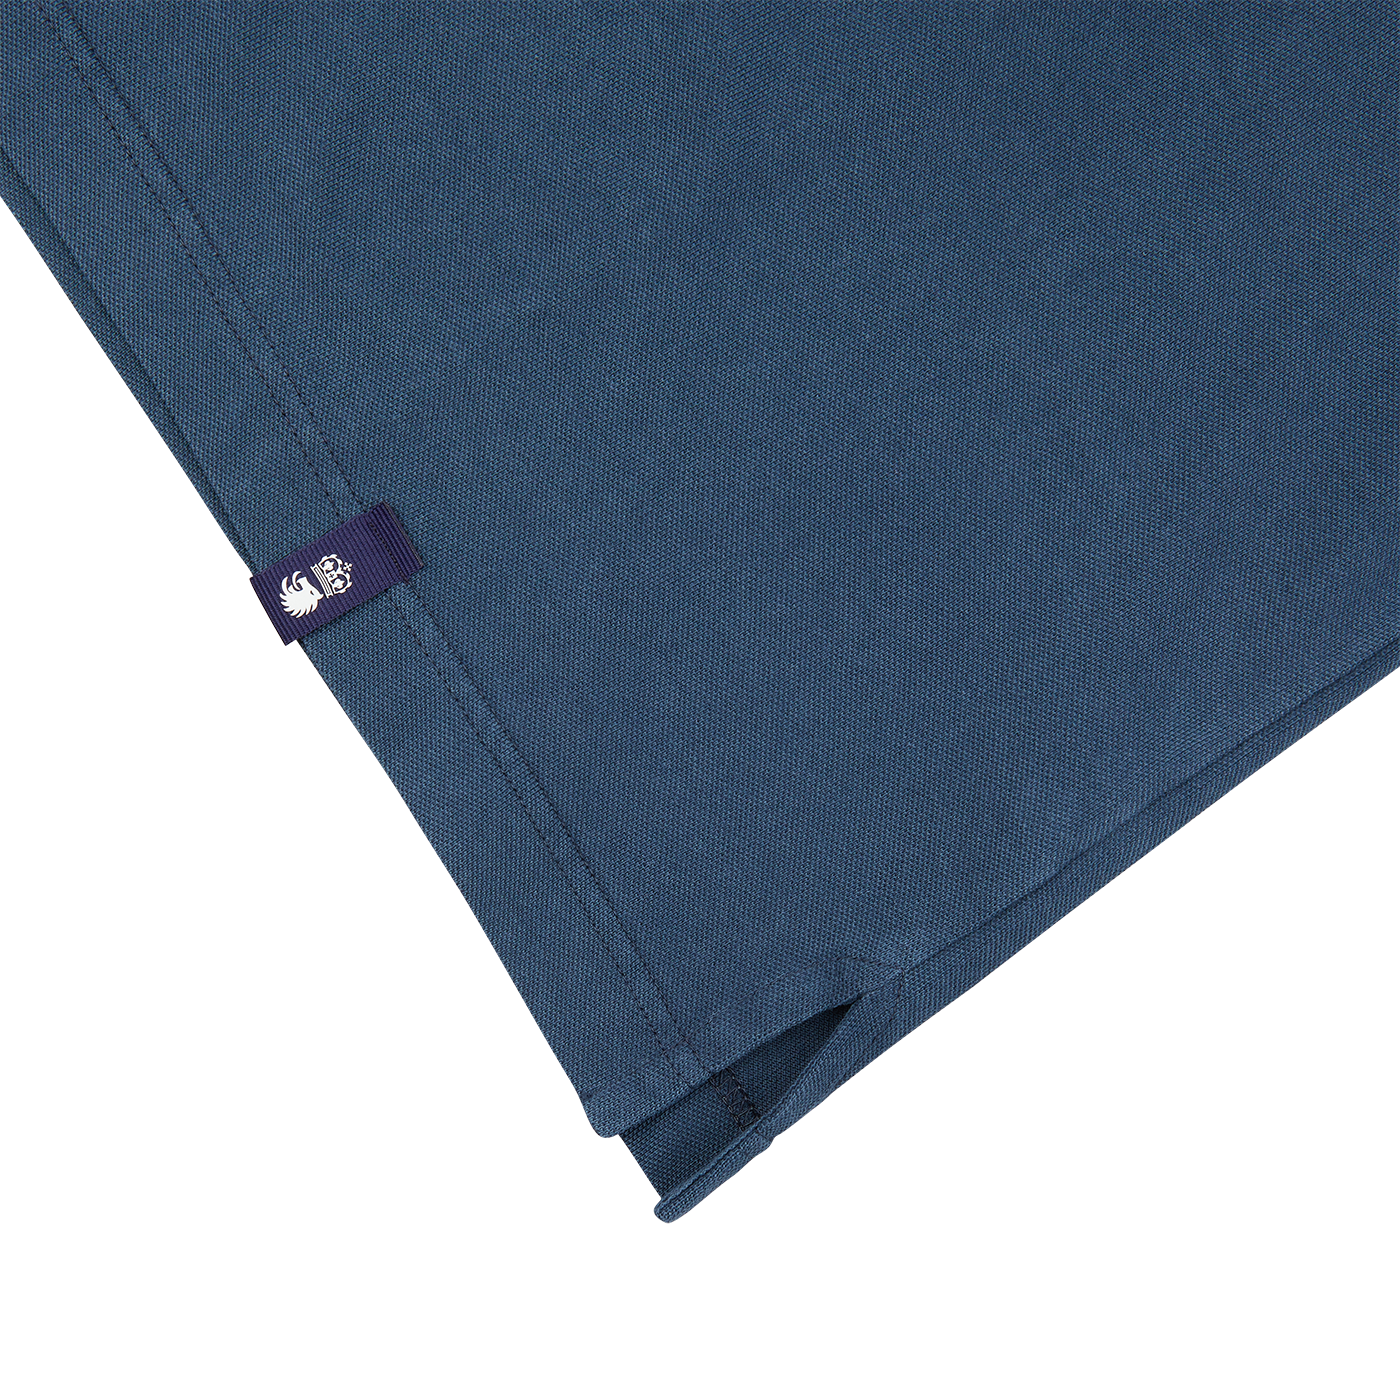 A Drumohr blue blanket with a purple tag attached.